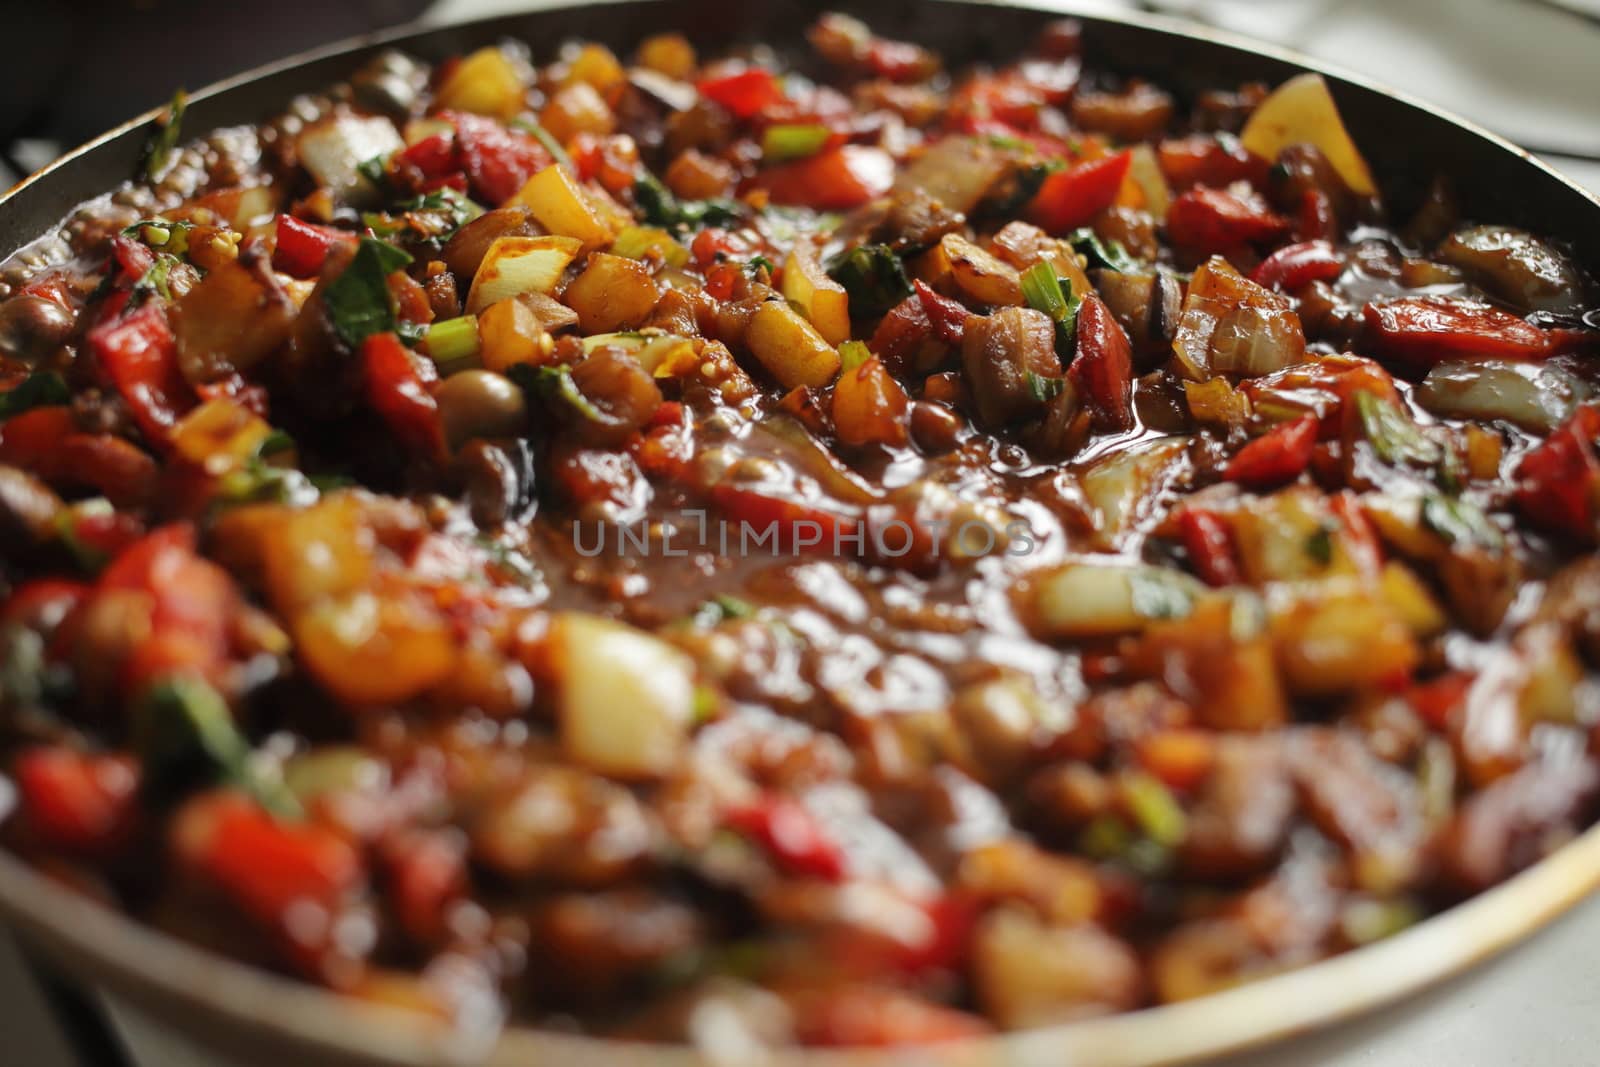 Healthy food vegetables are fried in a pan Tomato eggplant onion pepper zucchini by selinsmo